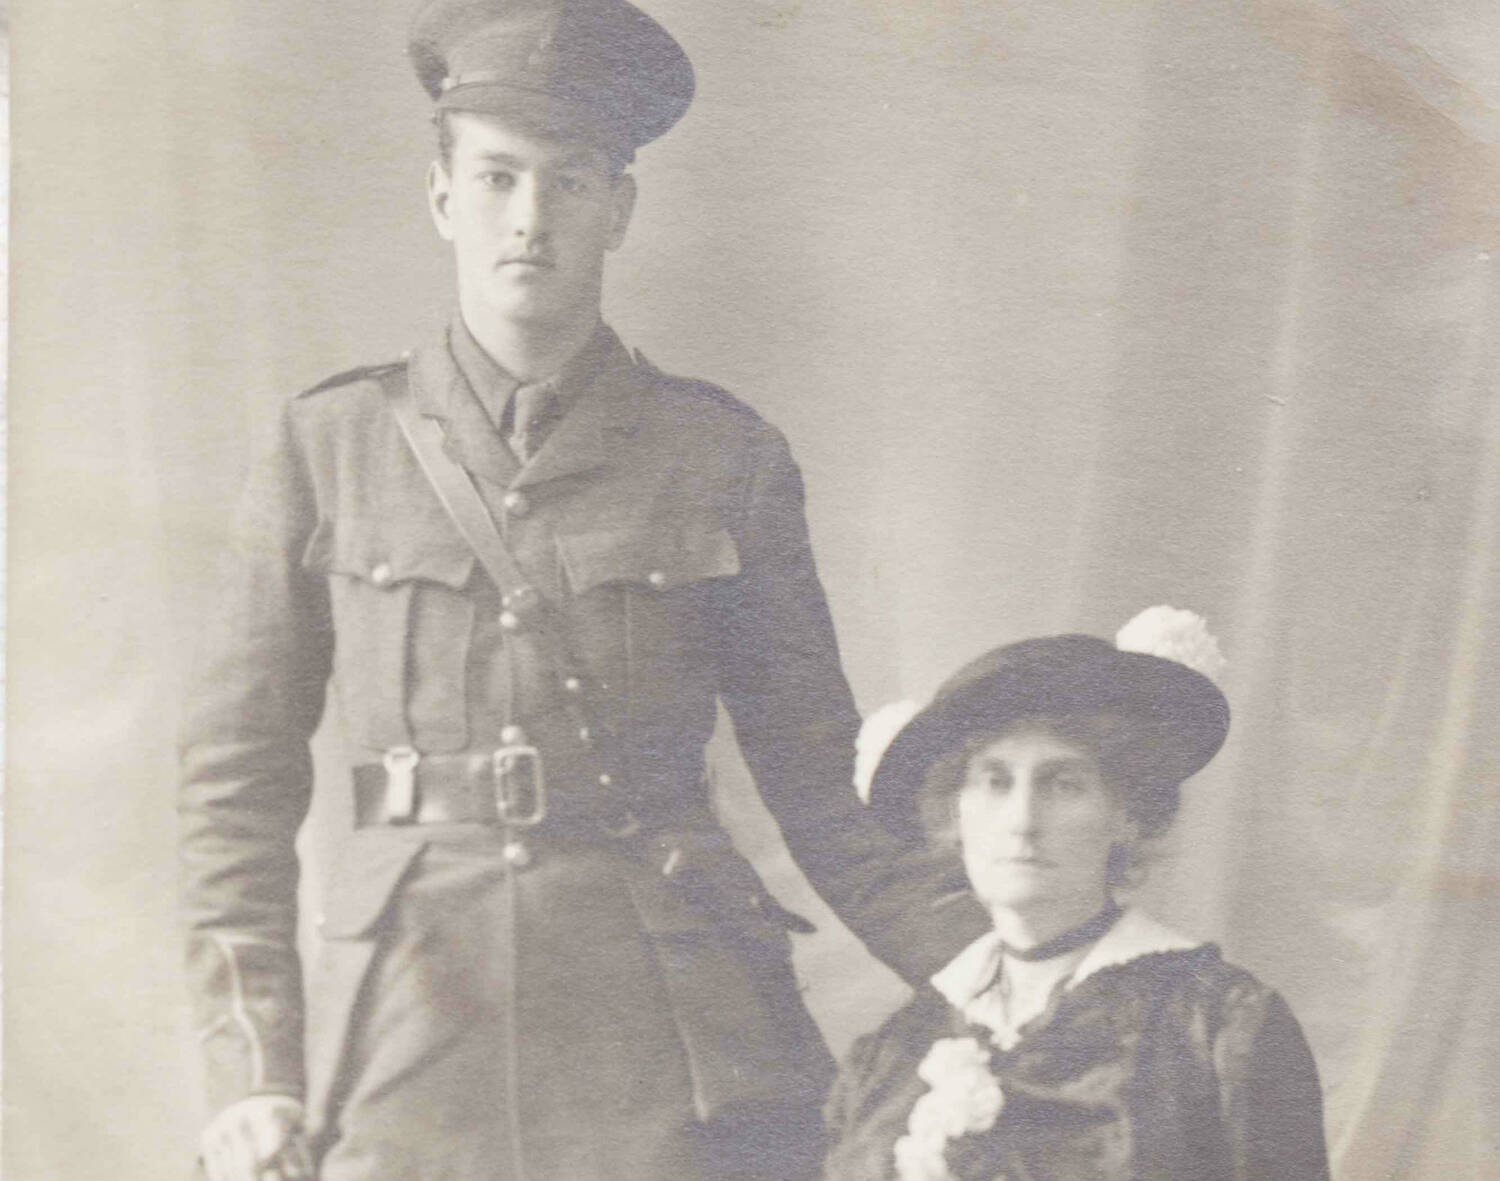 Photograph of Harry Jacob in his BEF uniform with his mother Violet, possibly 1914 or 1915